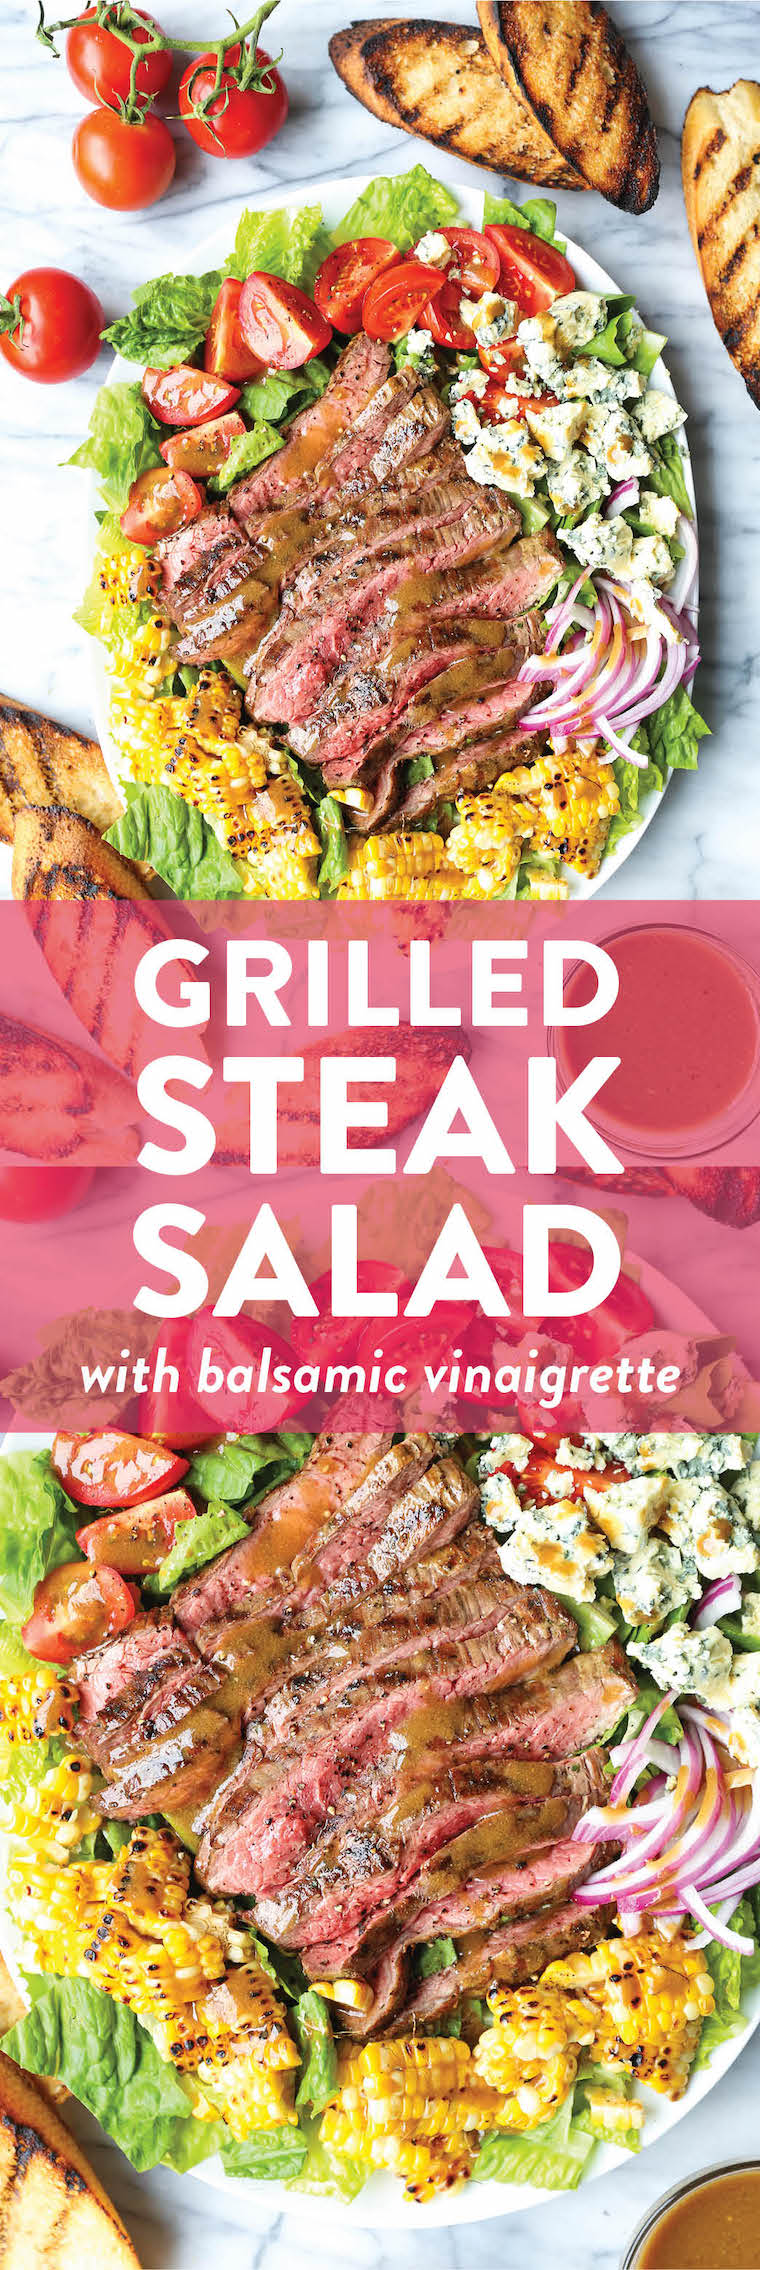 Grilled Steak Salad with Balsamic Vinaigrette - Features perfectly grilled steak, charred corn, tomatoes and blue cheese.  Say goodbye to boring salads!  SO SO GOOD.